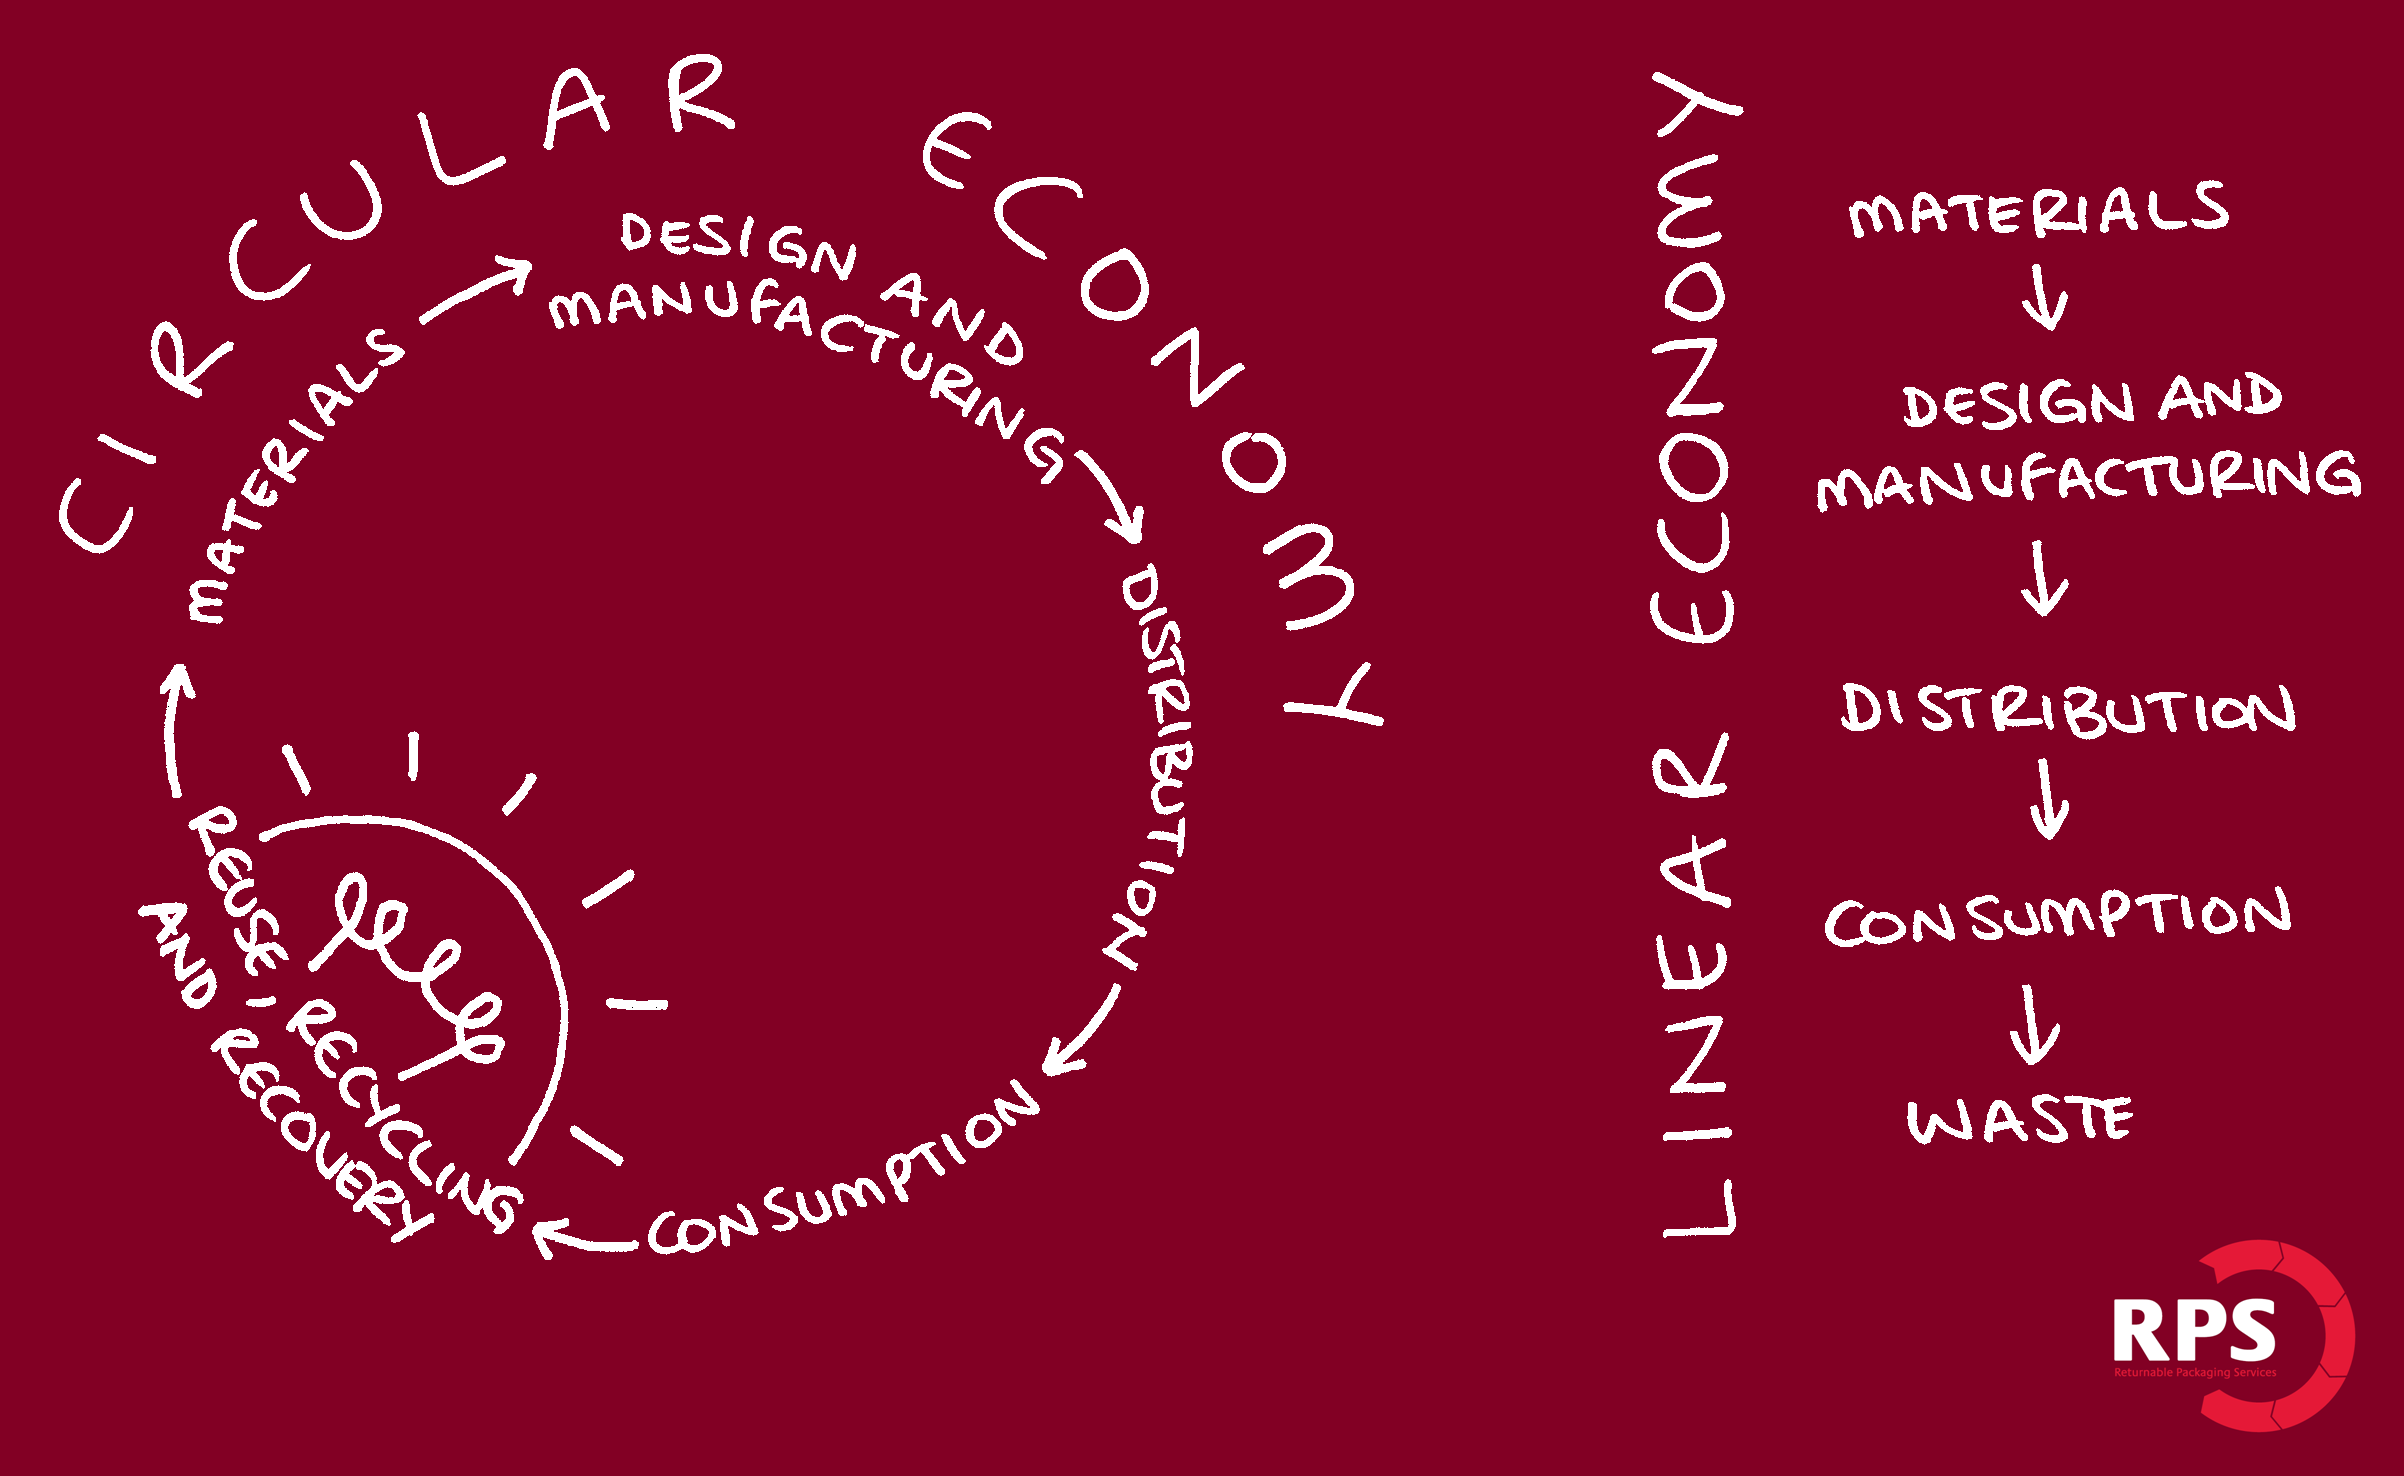 RPS Circular Economy Image with Linear Economy